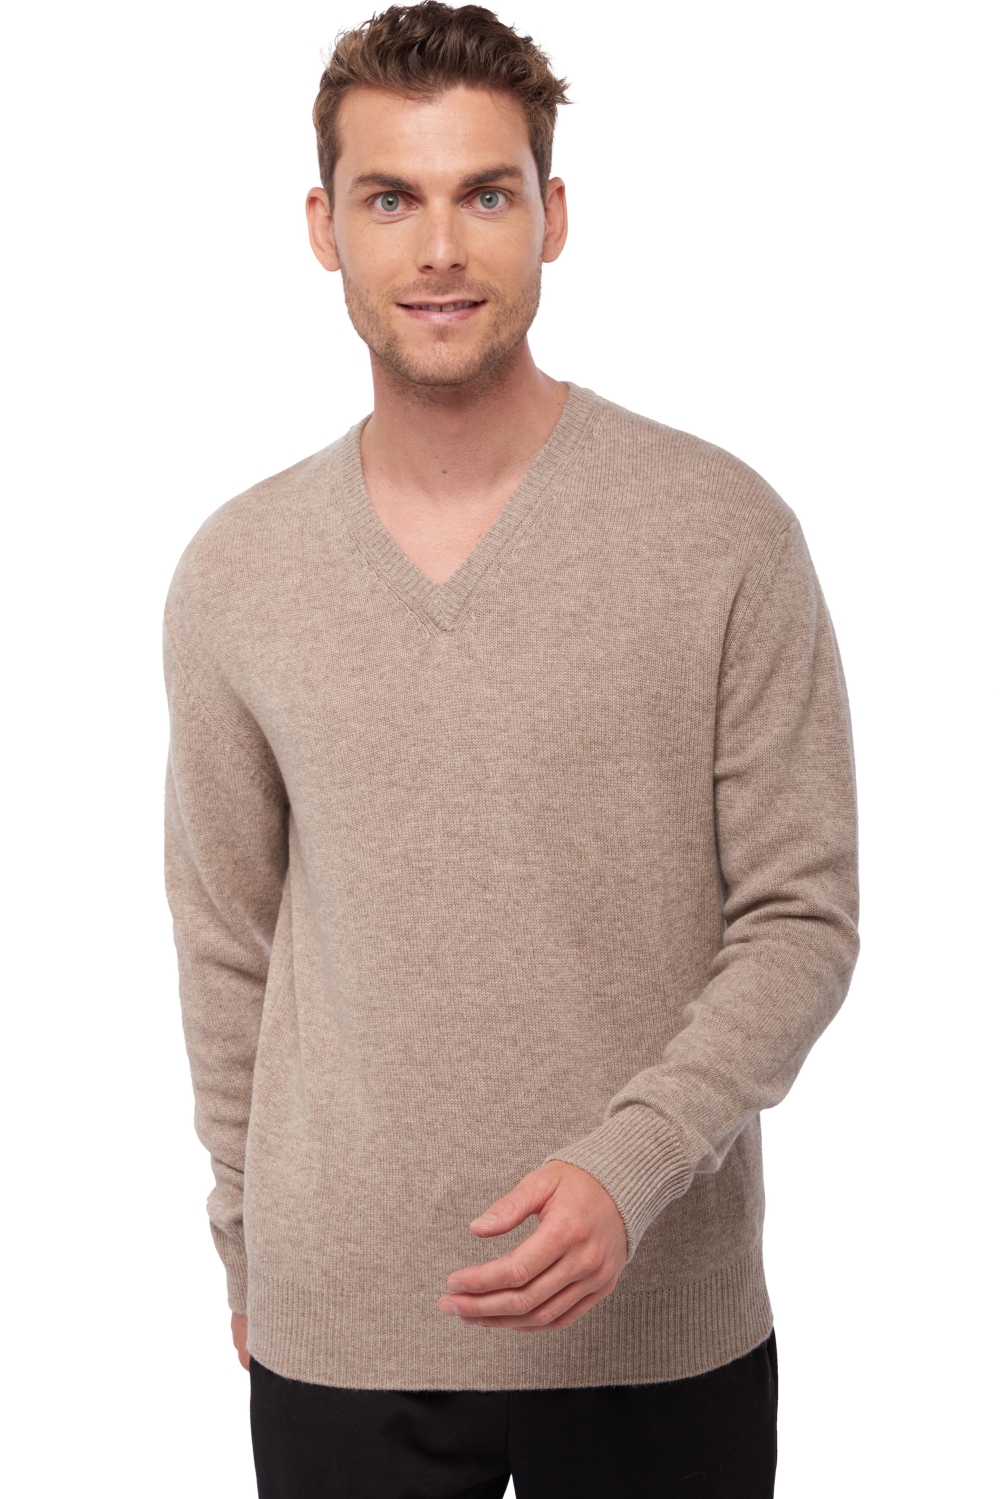 Cachemire pull homme hippolyte 4f toast 2xl